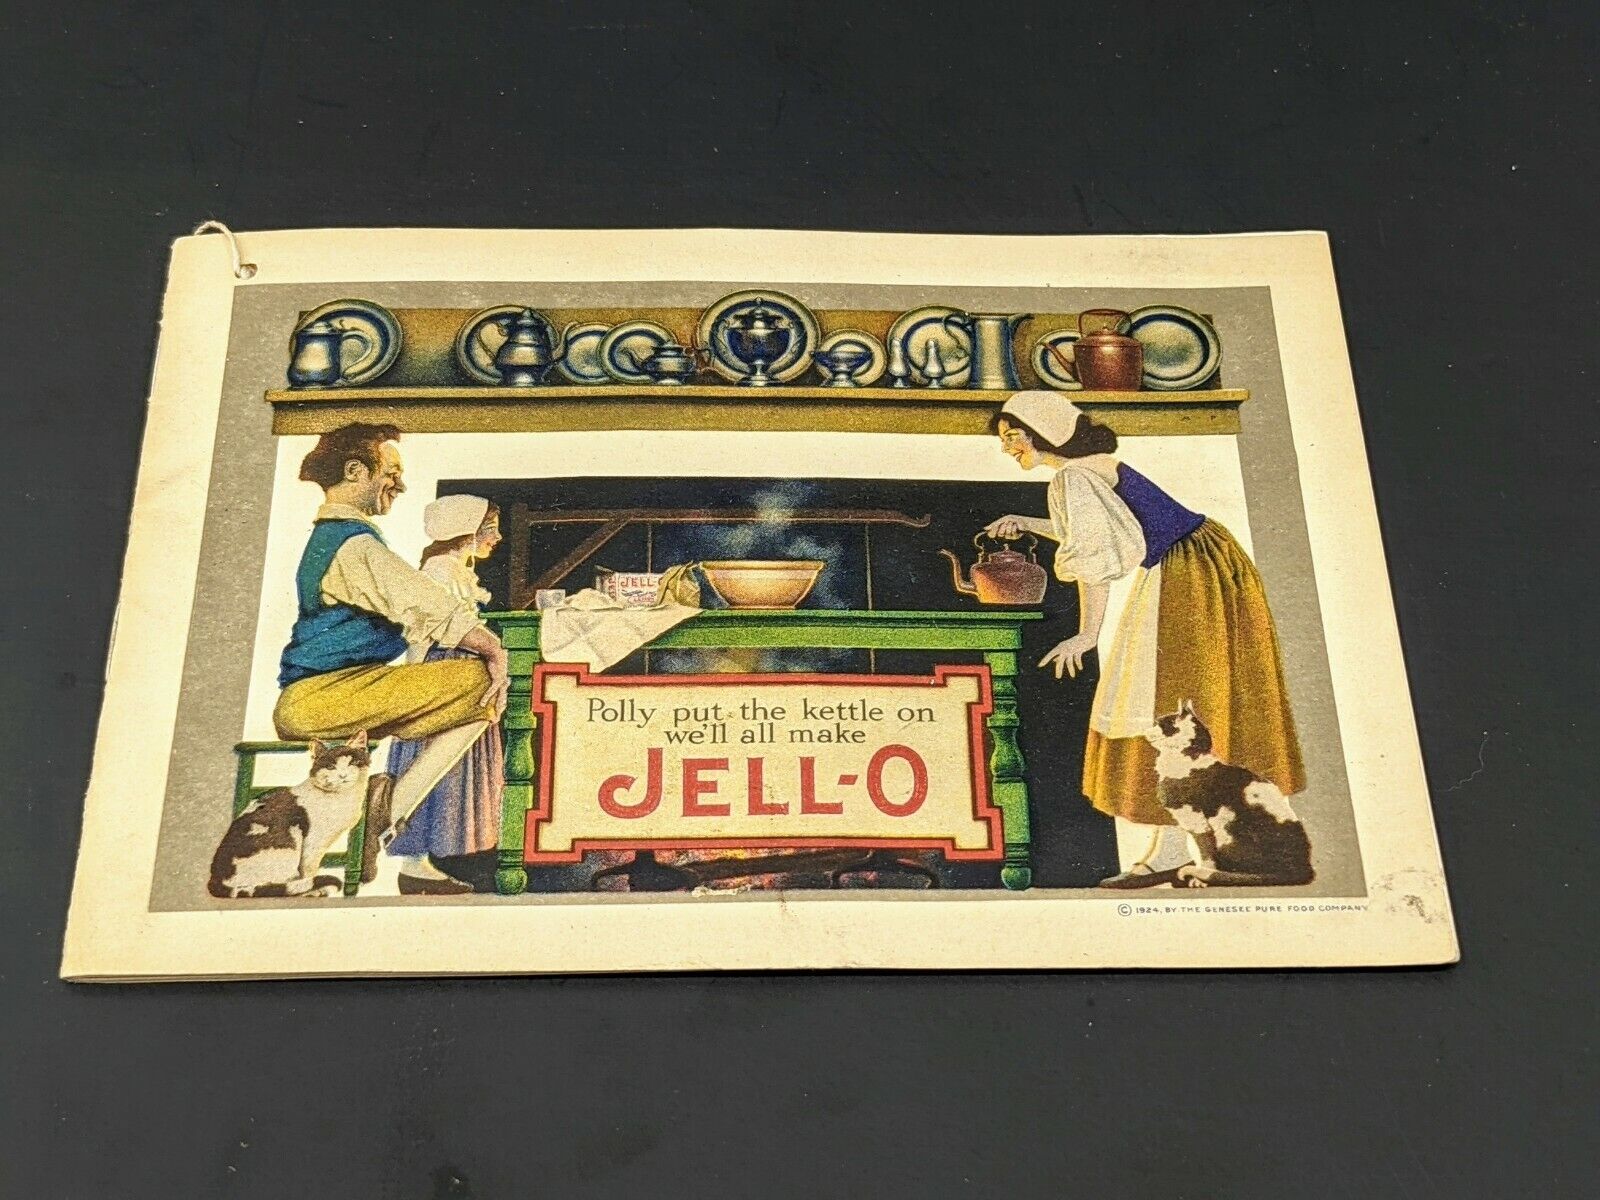 Vintage 1924 Jello Advertising Booklet Maxfield Parrish Jell-o Recipe Book Cook